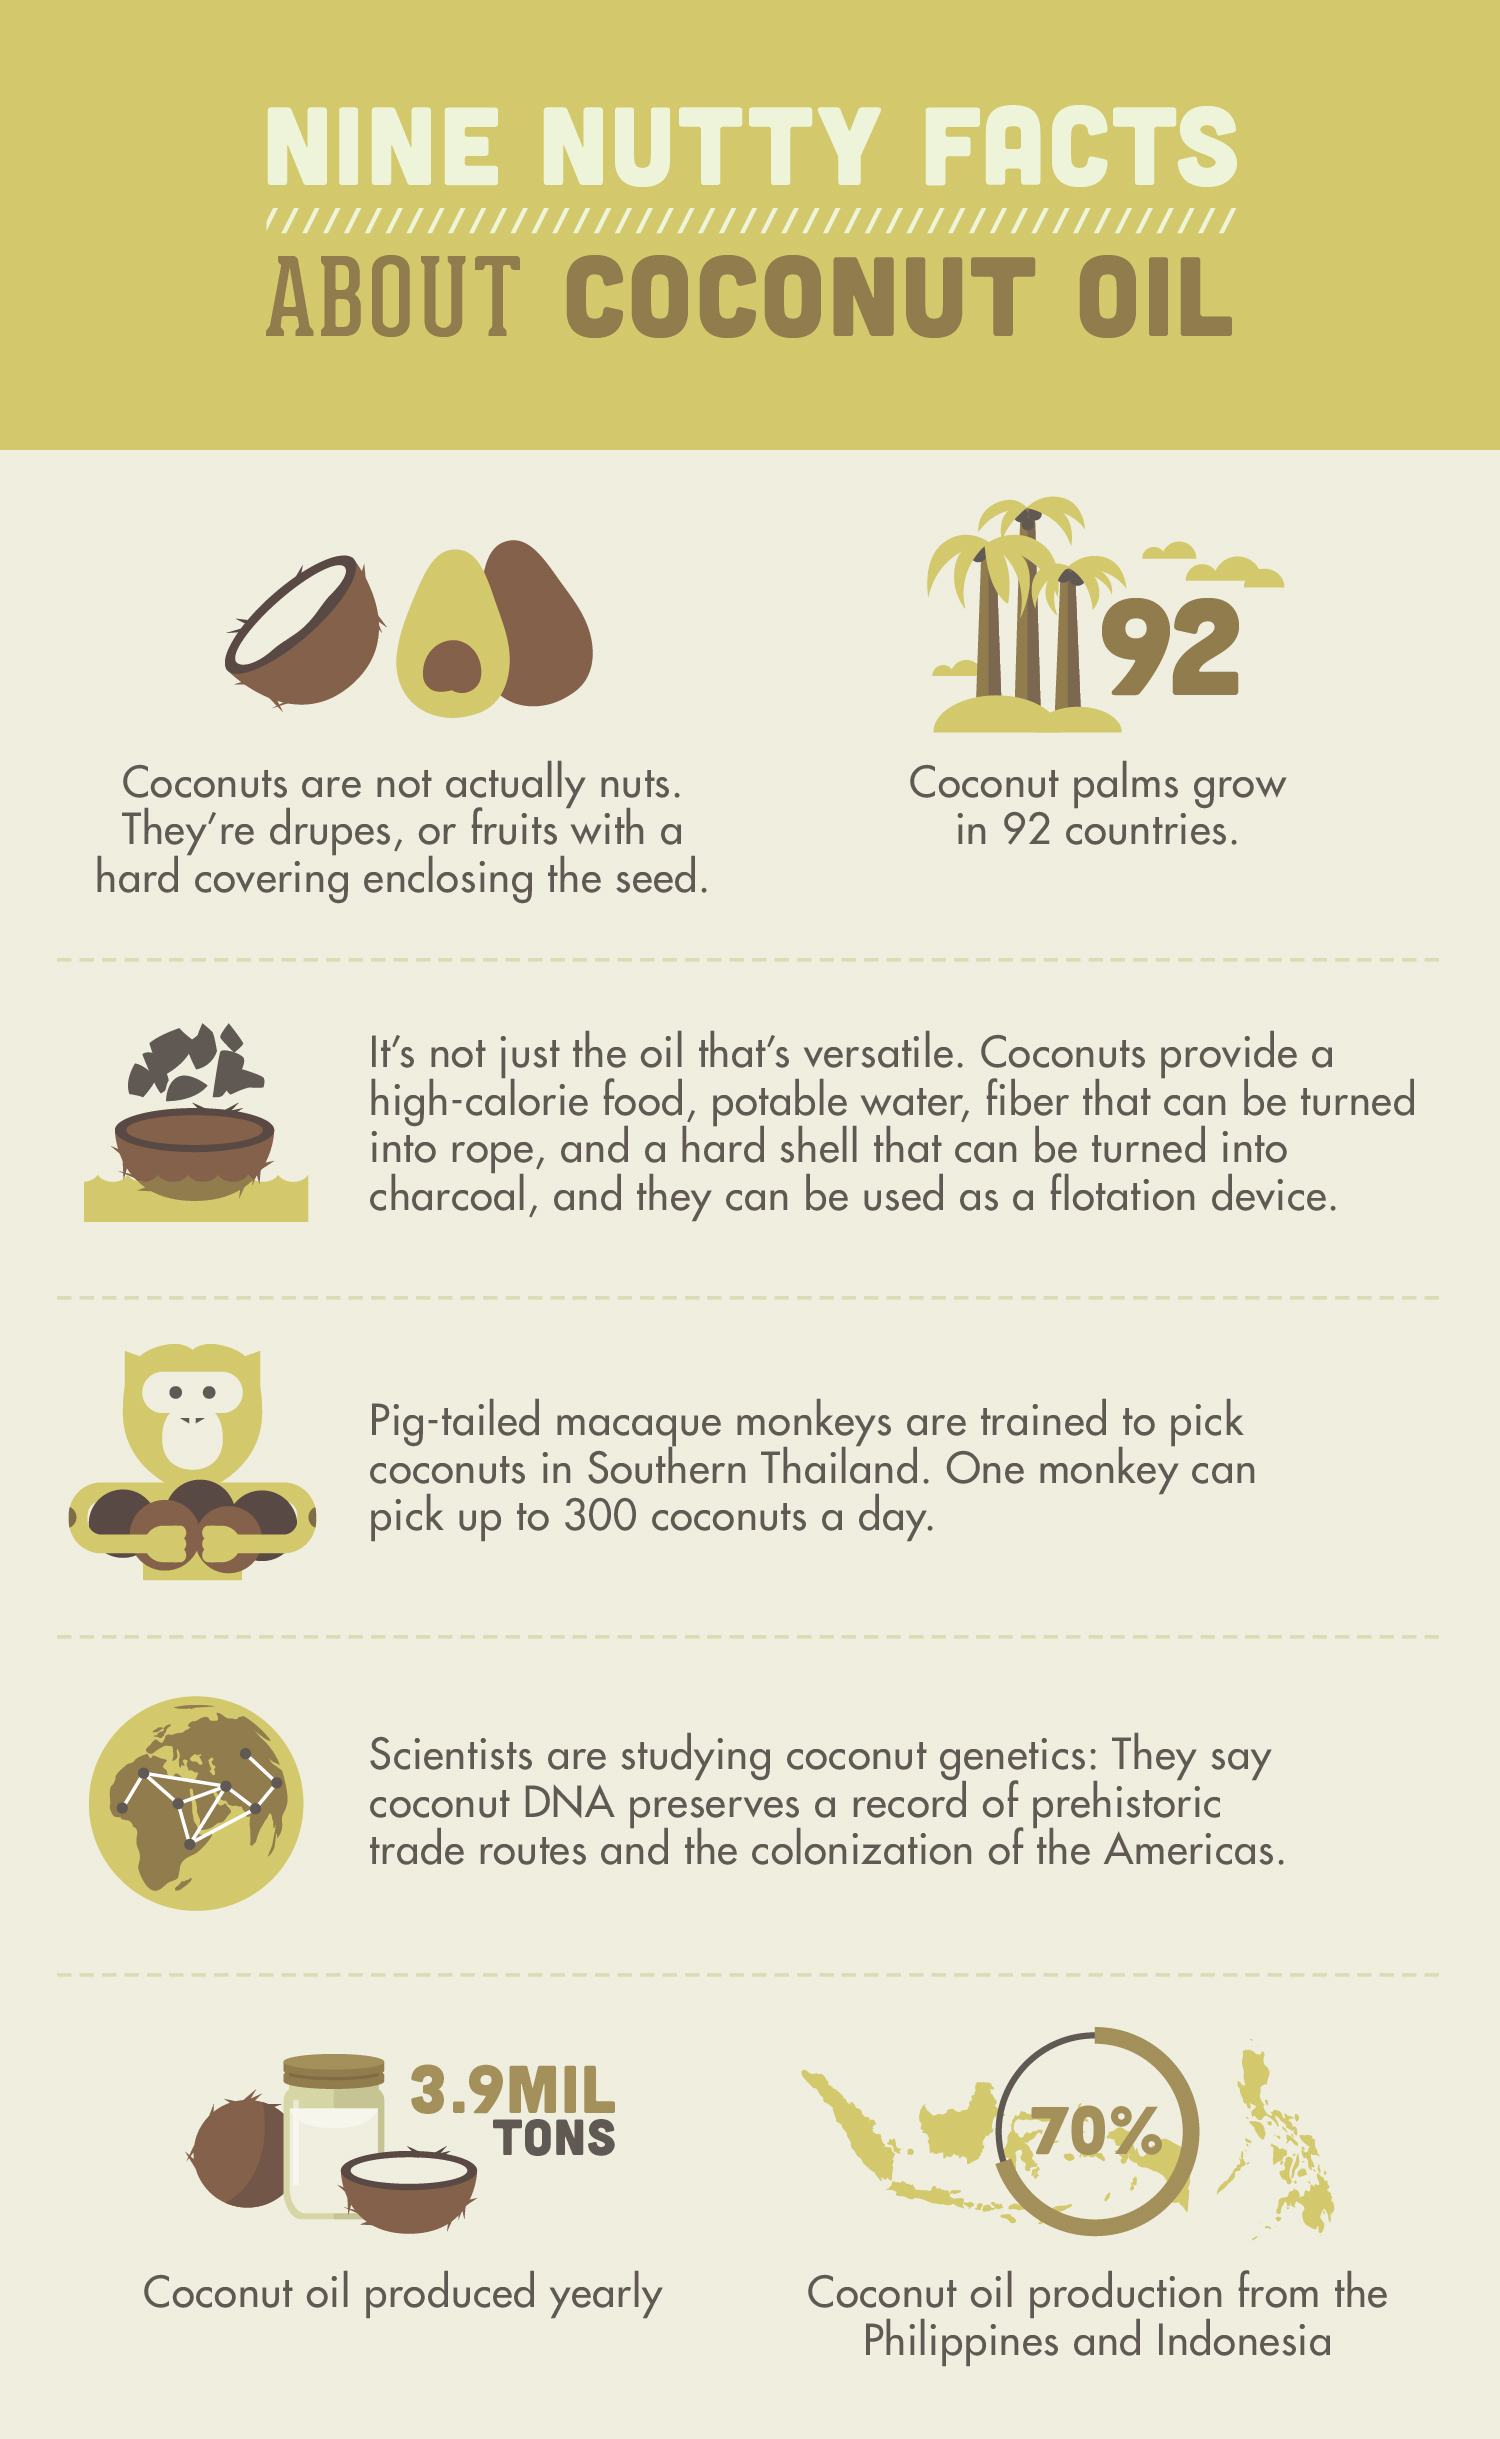 Nine Nutty Facts About Coconut Oil